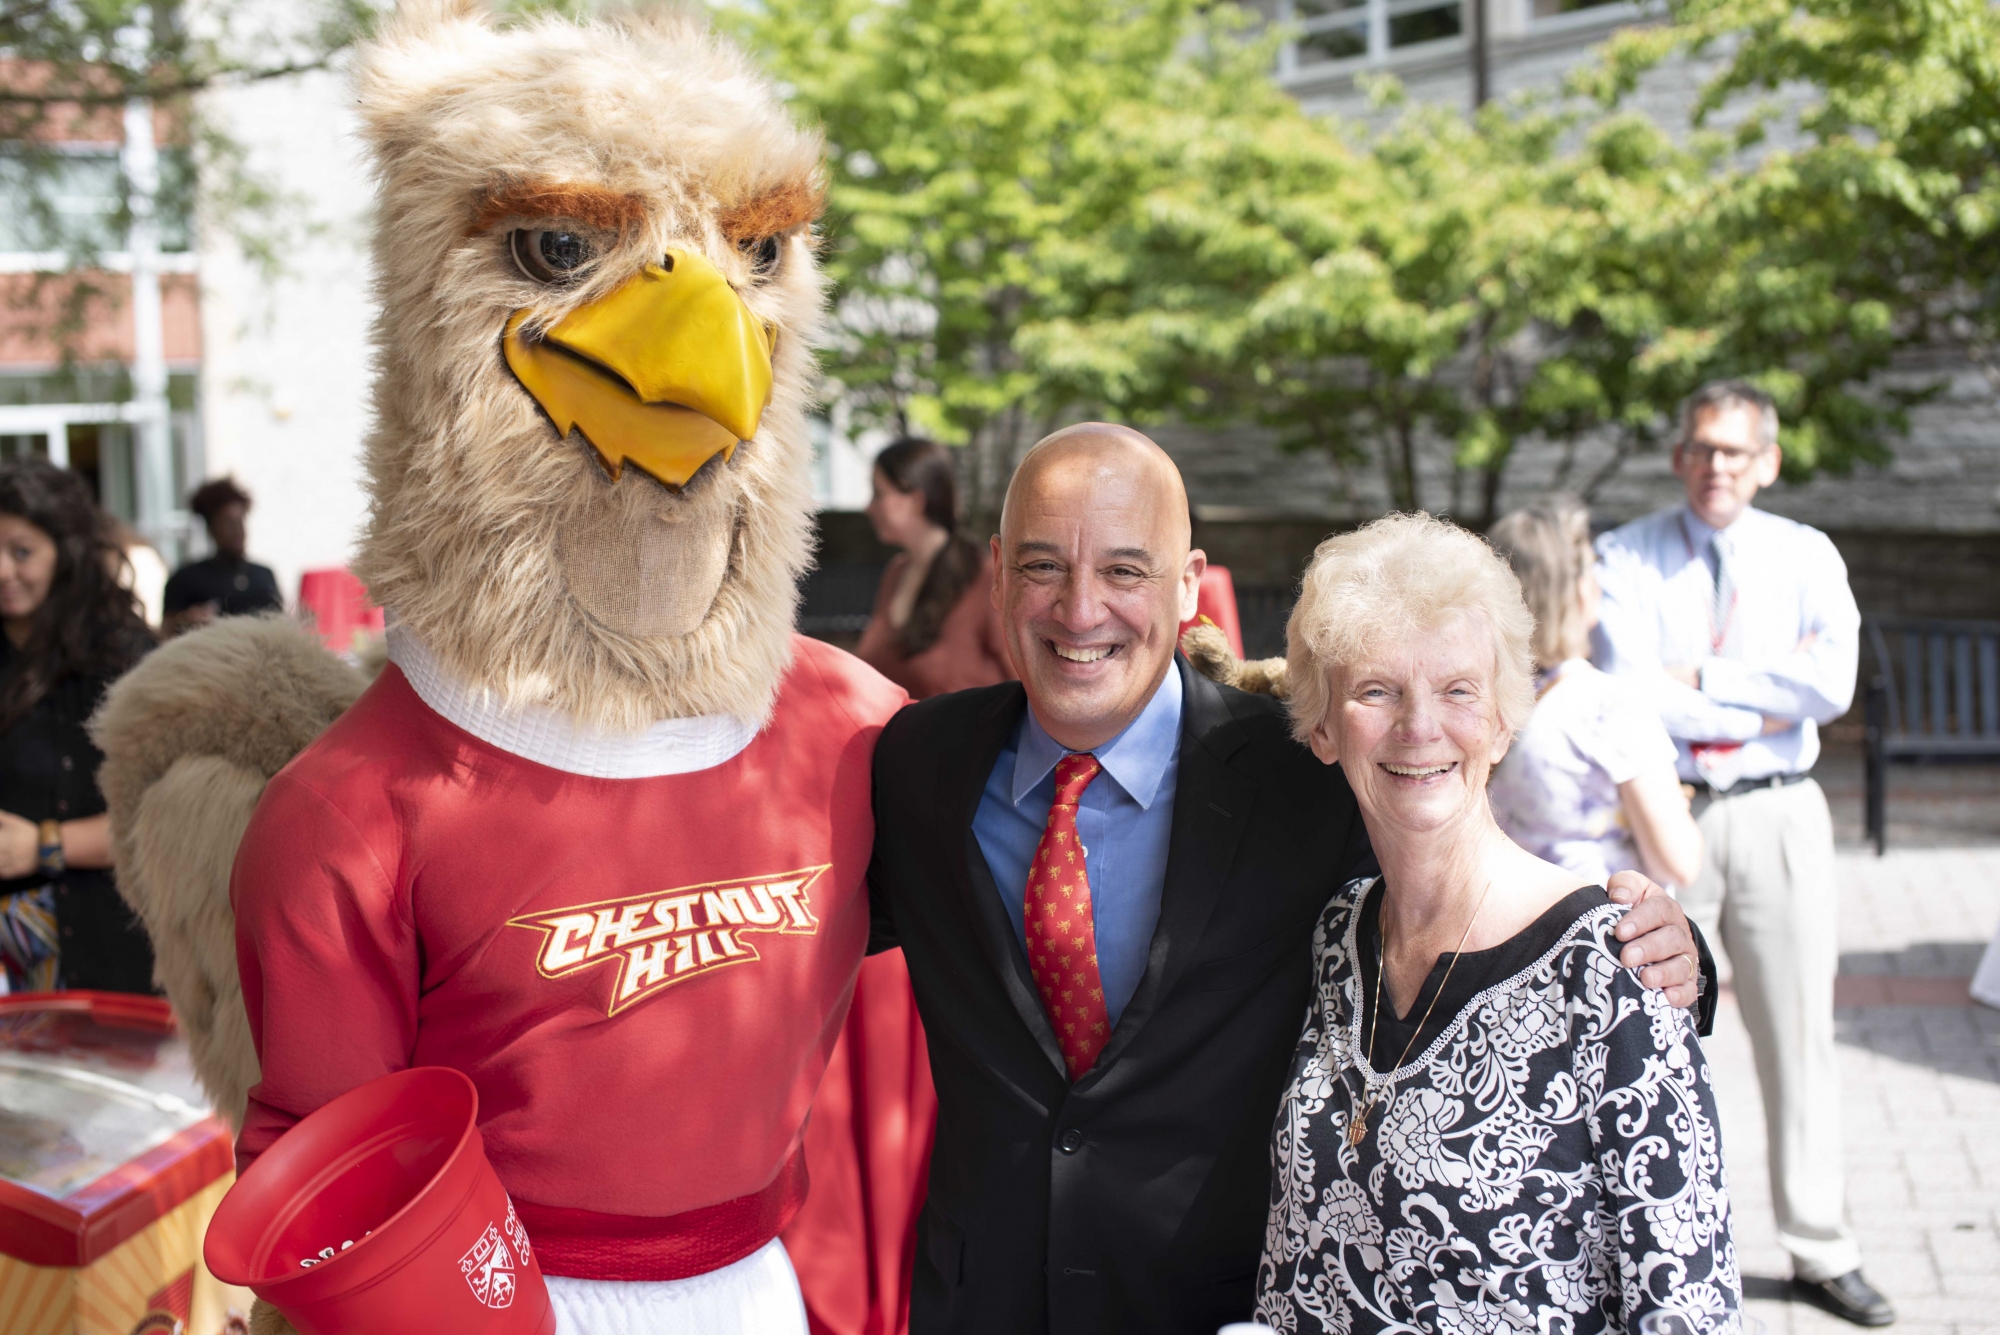 Dr. Latimer and Big Griff had a great time at Reunion, meeting many generations of Griffins!